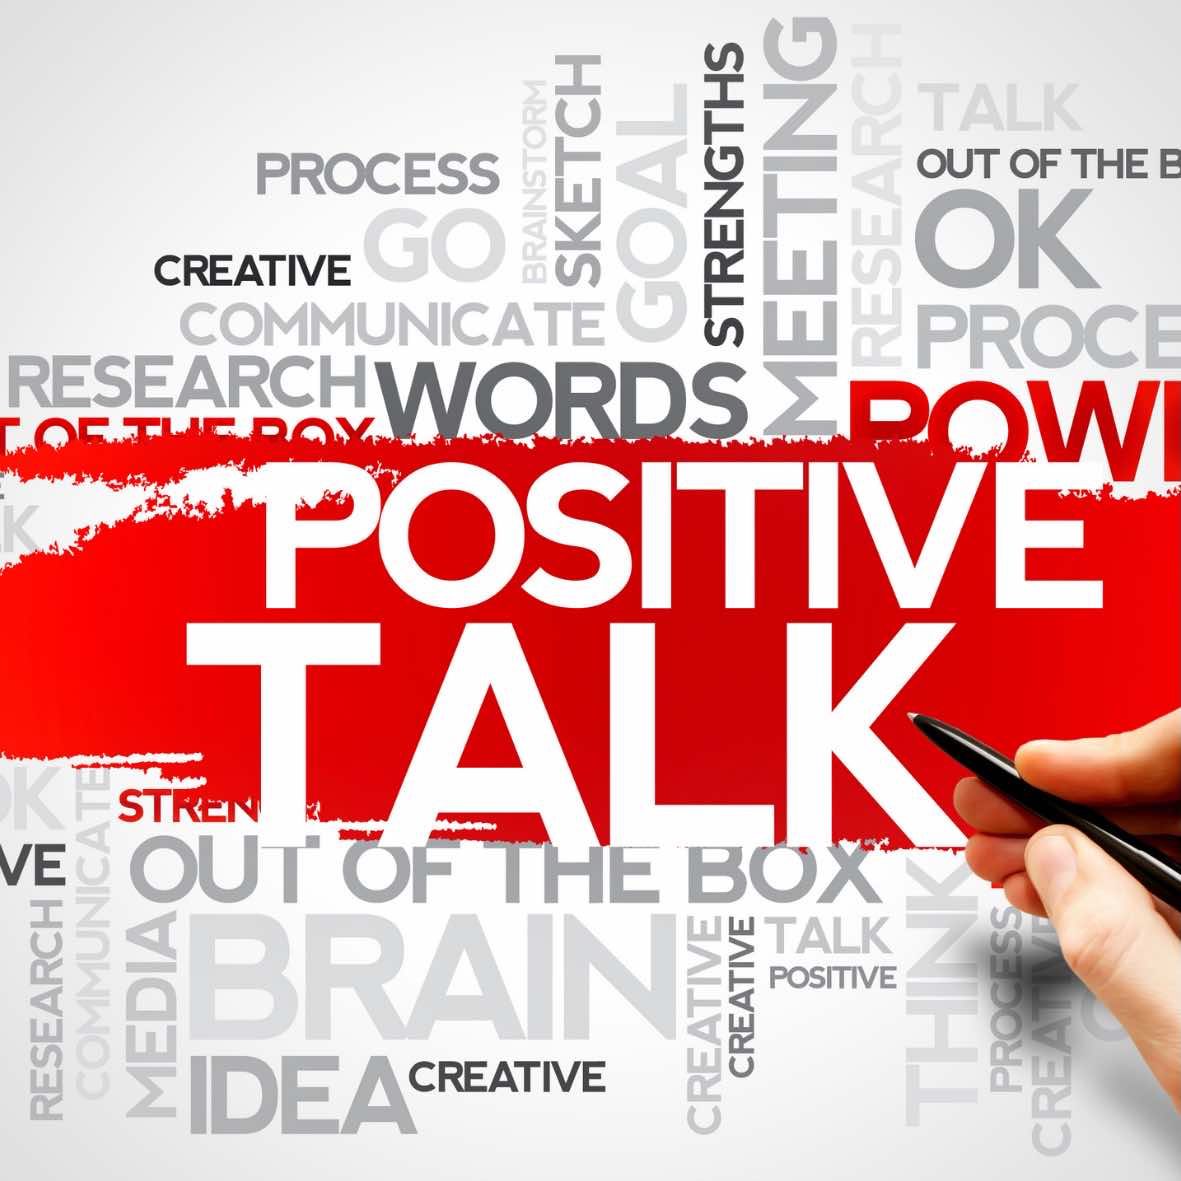 How Positive Self-Talk Can Make You Feel Better And Be More Productive